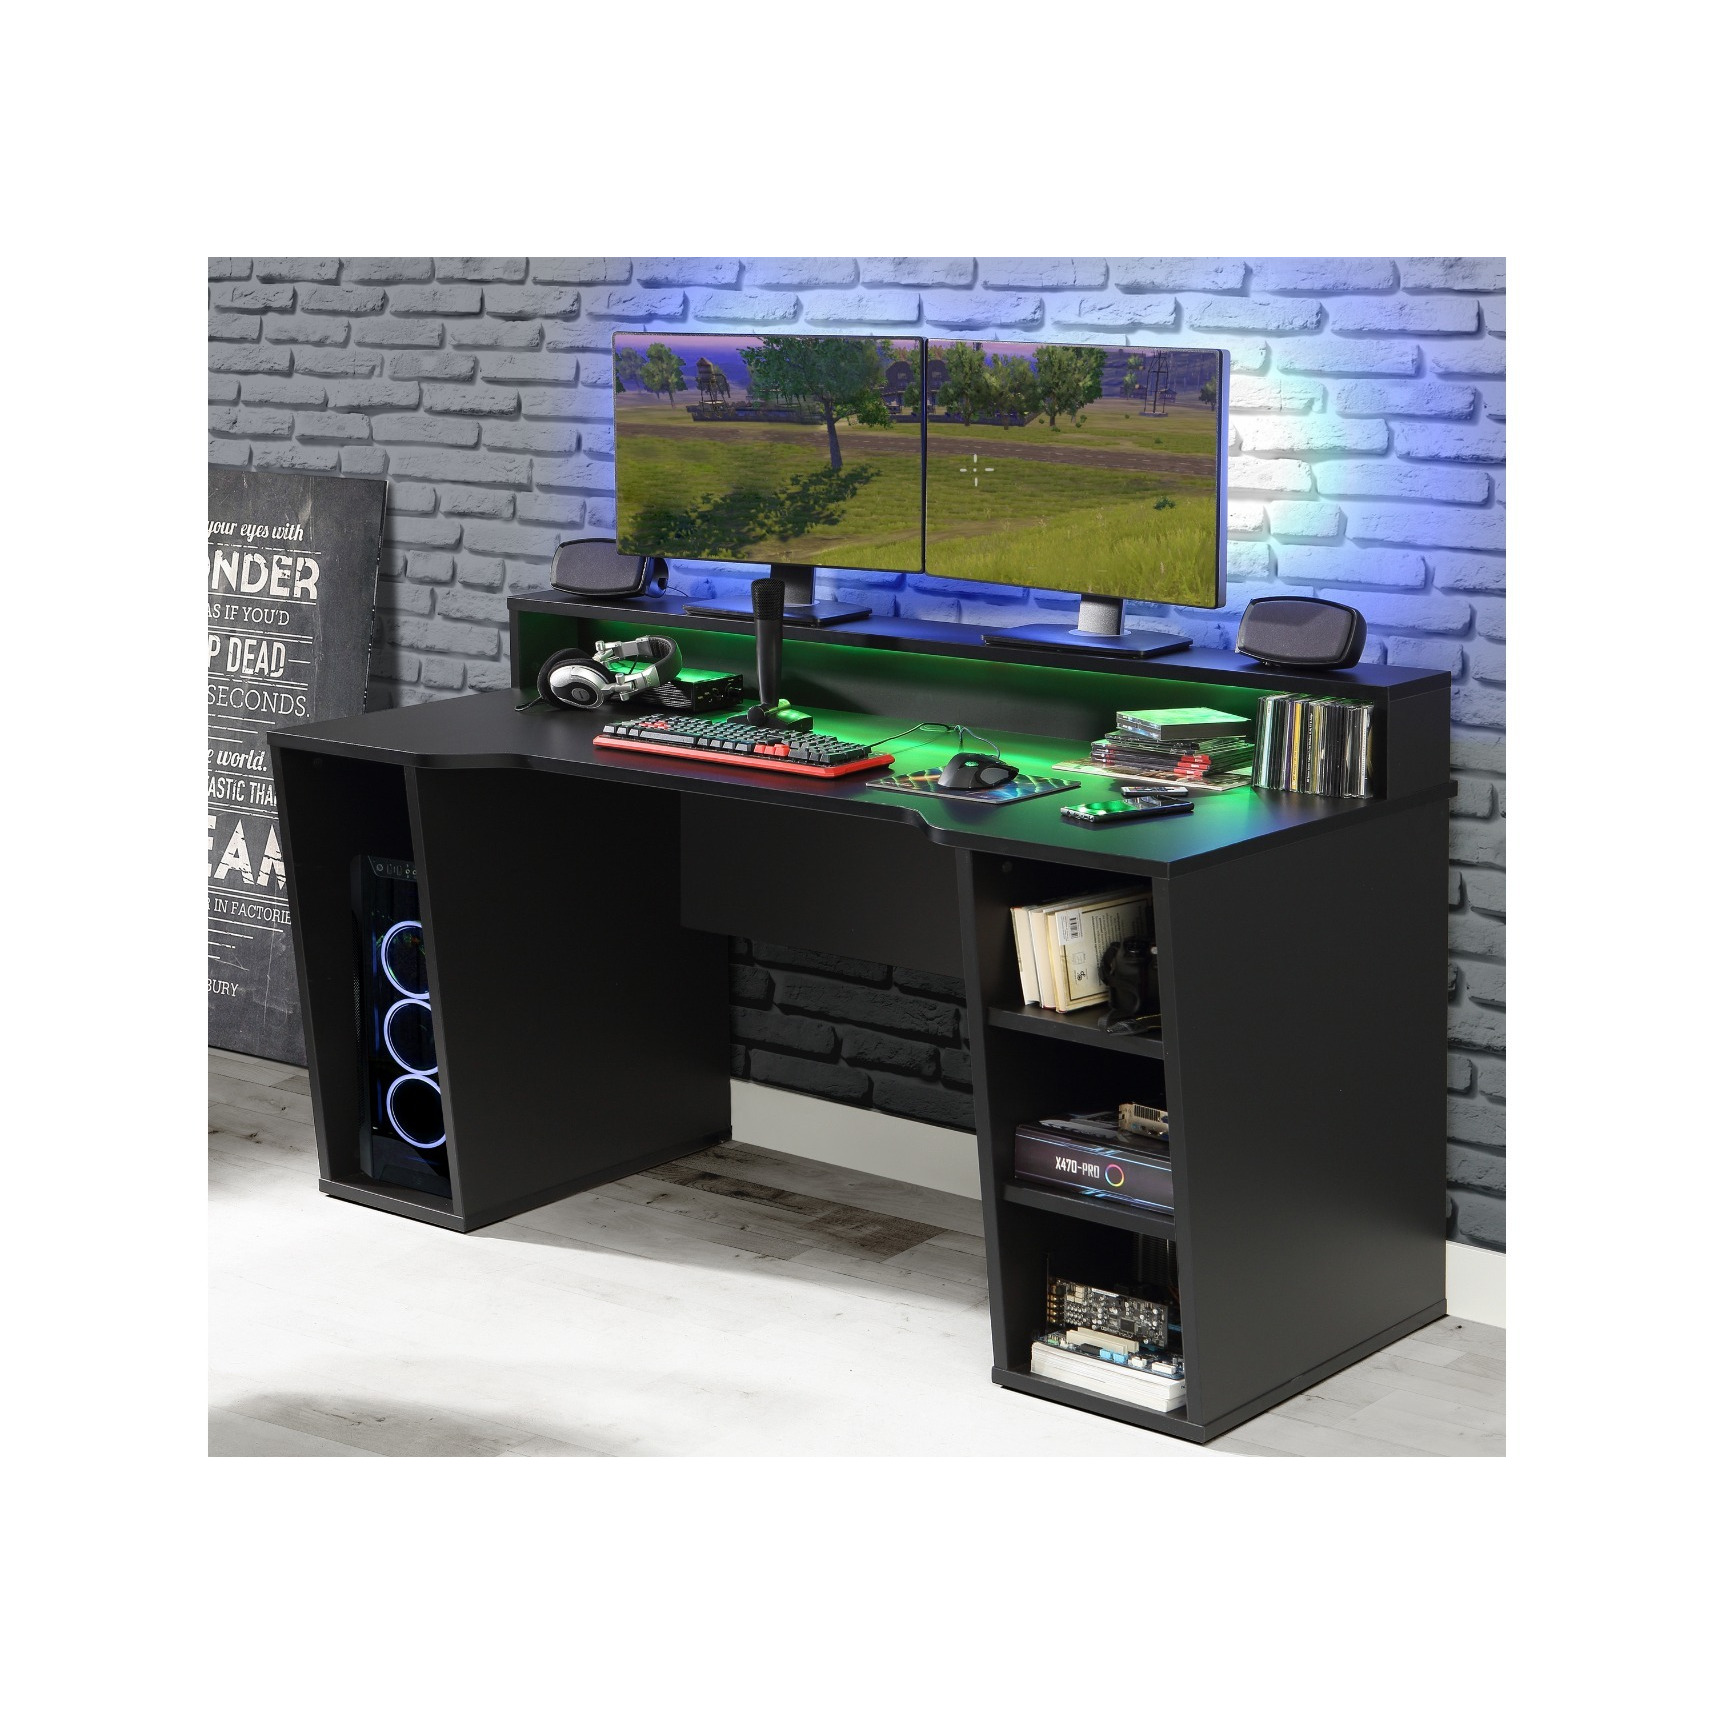 Flair Power X Black Computer Gaming Desk With Colour Changing LED Lights - image 1